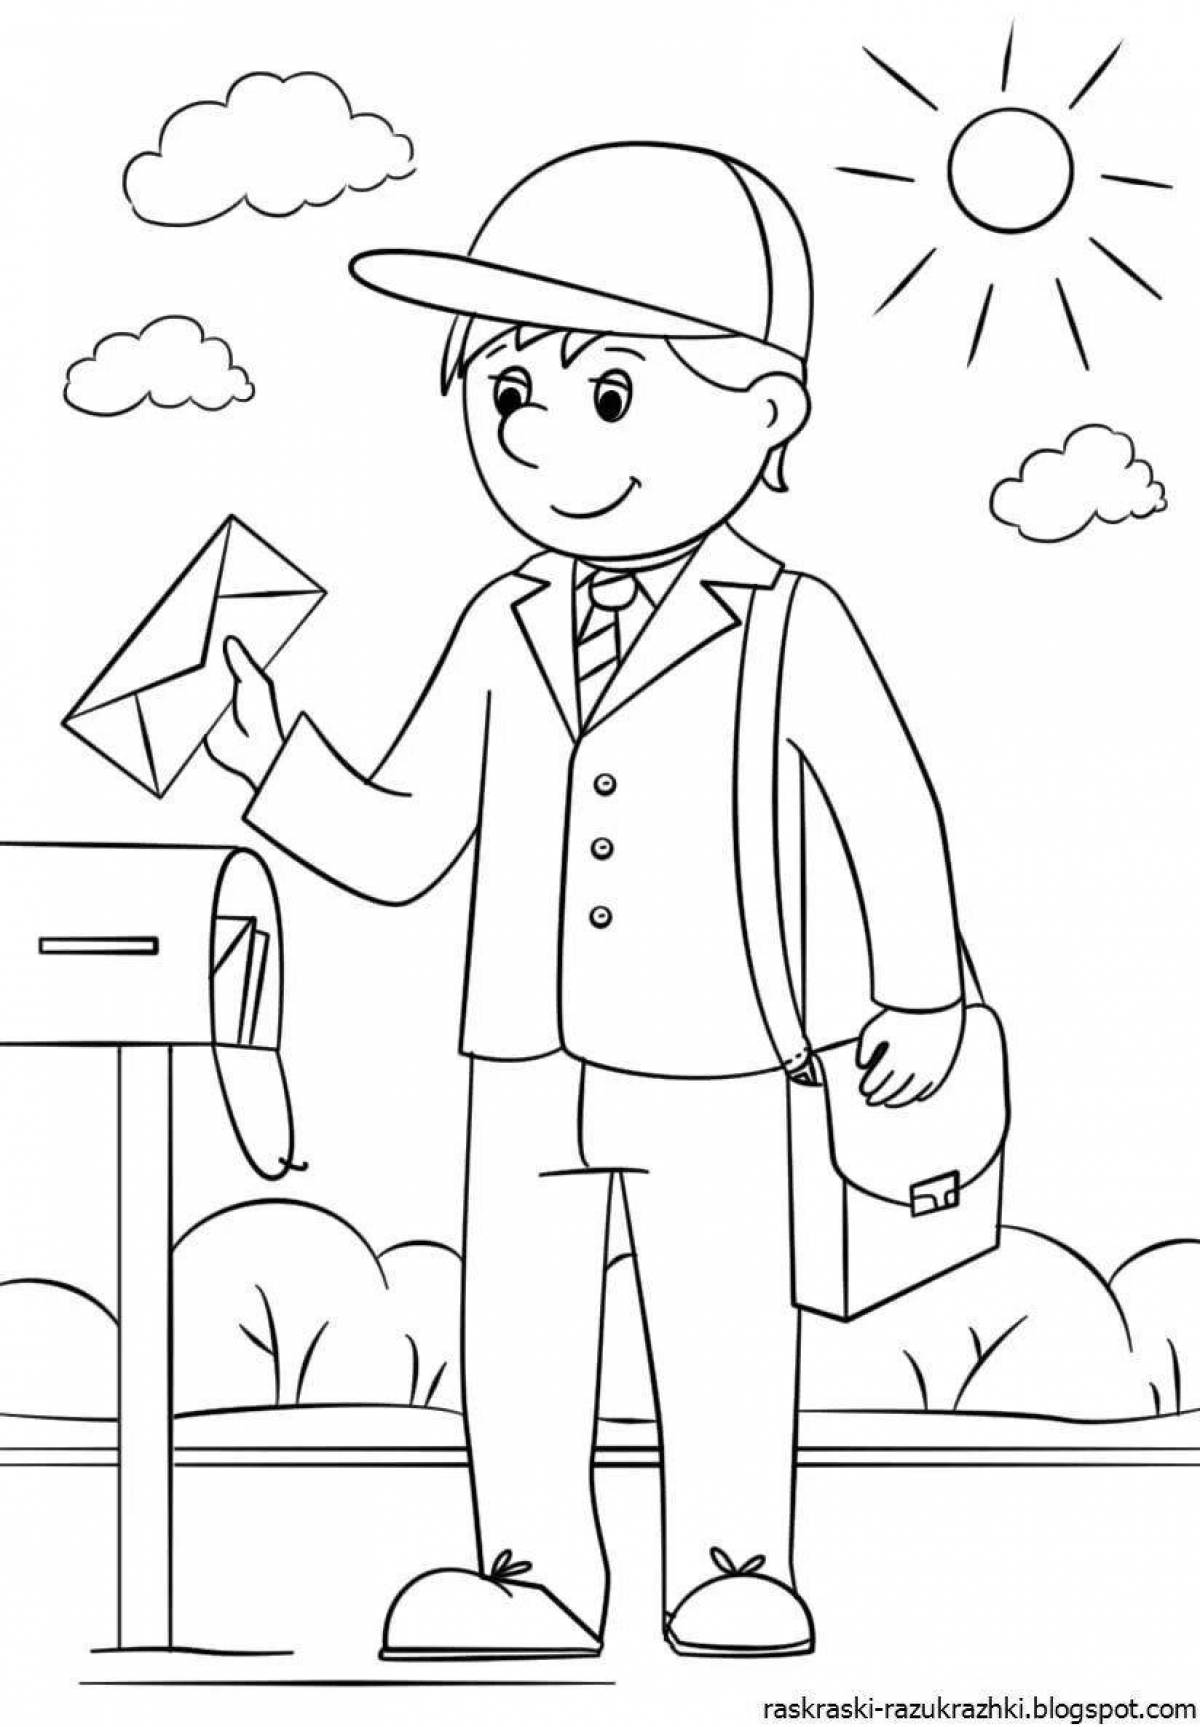 Bright coloring for children professions